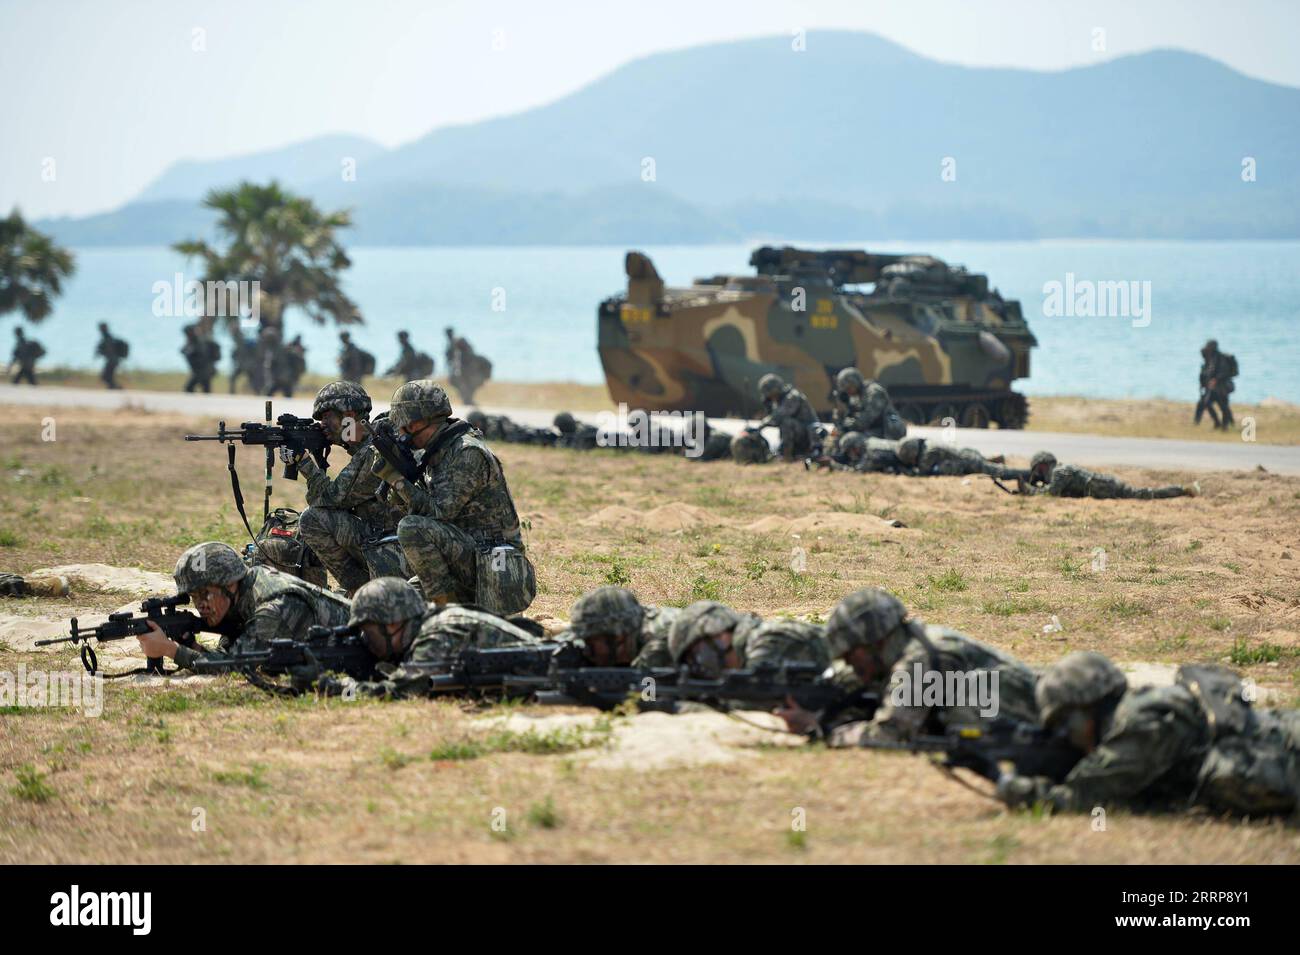 230304 -- CHONBURI, March 4, 2023 -- Military personnel participate in amphibious exercise during the multinational exercise Cobra Gold 2023 in Chonburi province, Thailand, March 3, 2023. The Cobra Gold 2023 exercise, with the core exercises including command post exercise, humanitarian civic assistance, and field training exercise, will last until March 10. Photo by /Xinhua THAILAND-CHONBURI-COBRA GOLD-AMPHIBIOUS EXERCISE RachenxSageamsak PUBLICATIONxNOTxINxCHN Stock Photo